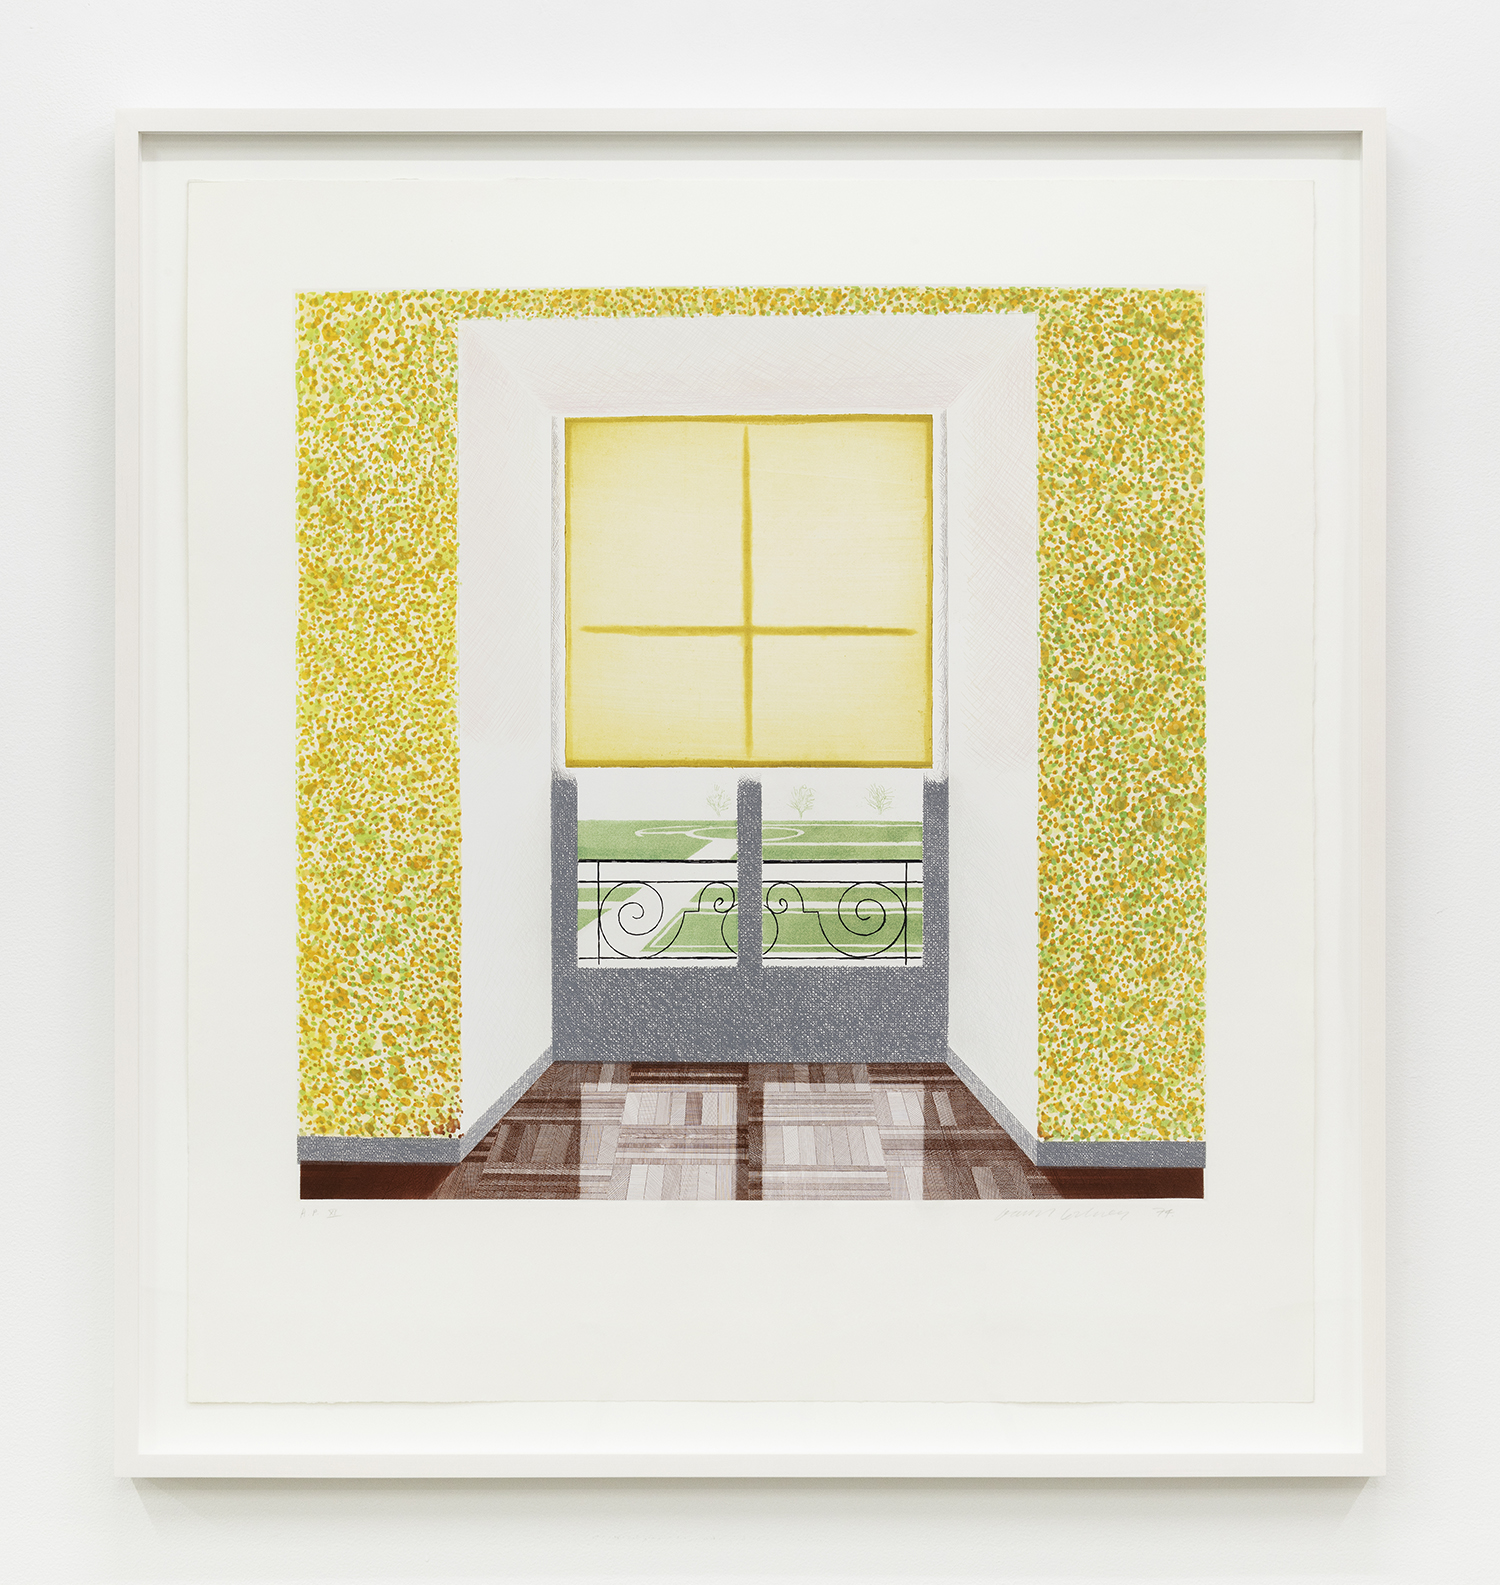 David Hockney Contrejour in the French Style, 1974 Etching and aquatint Image Dimensions: 29 x 29 1/4 inches (73.7 x 74.3 cm) Paper Dimensions: 39 1/8 x 36 1/4 inches (99.4 x 92.1 cm) Framed Dimensions: 43 3/8 x 40 1/2 inches (110.2 x 102.9 cm) Edition of 75, plus AP XI